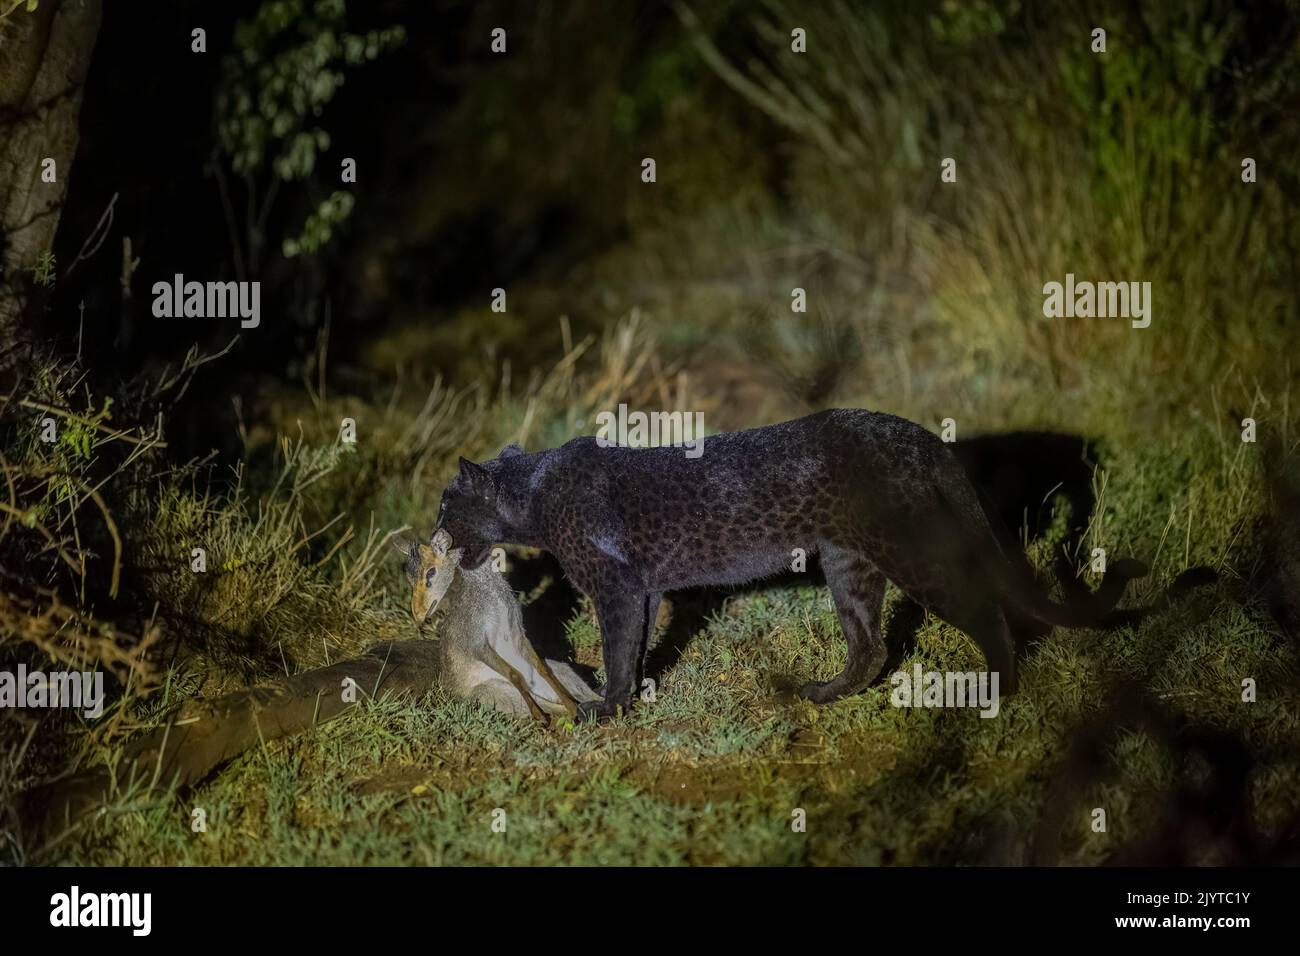 Extremely rare photo of a Black Panther or African Black Leopard (Panthera pardus pardus), melanistic form, evolving at night in dry shrubby savannah, killed a small antelope, Günther's Dik-Dik, very special leopard subspecies, Laikipia County, Kenya, East Africa, Africa Stock Photo